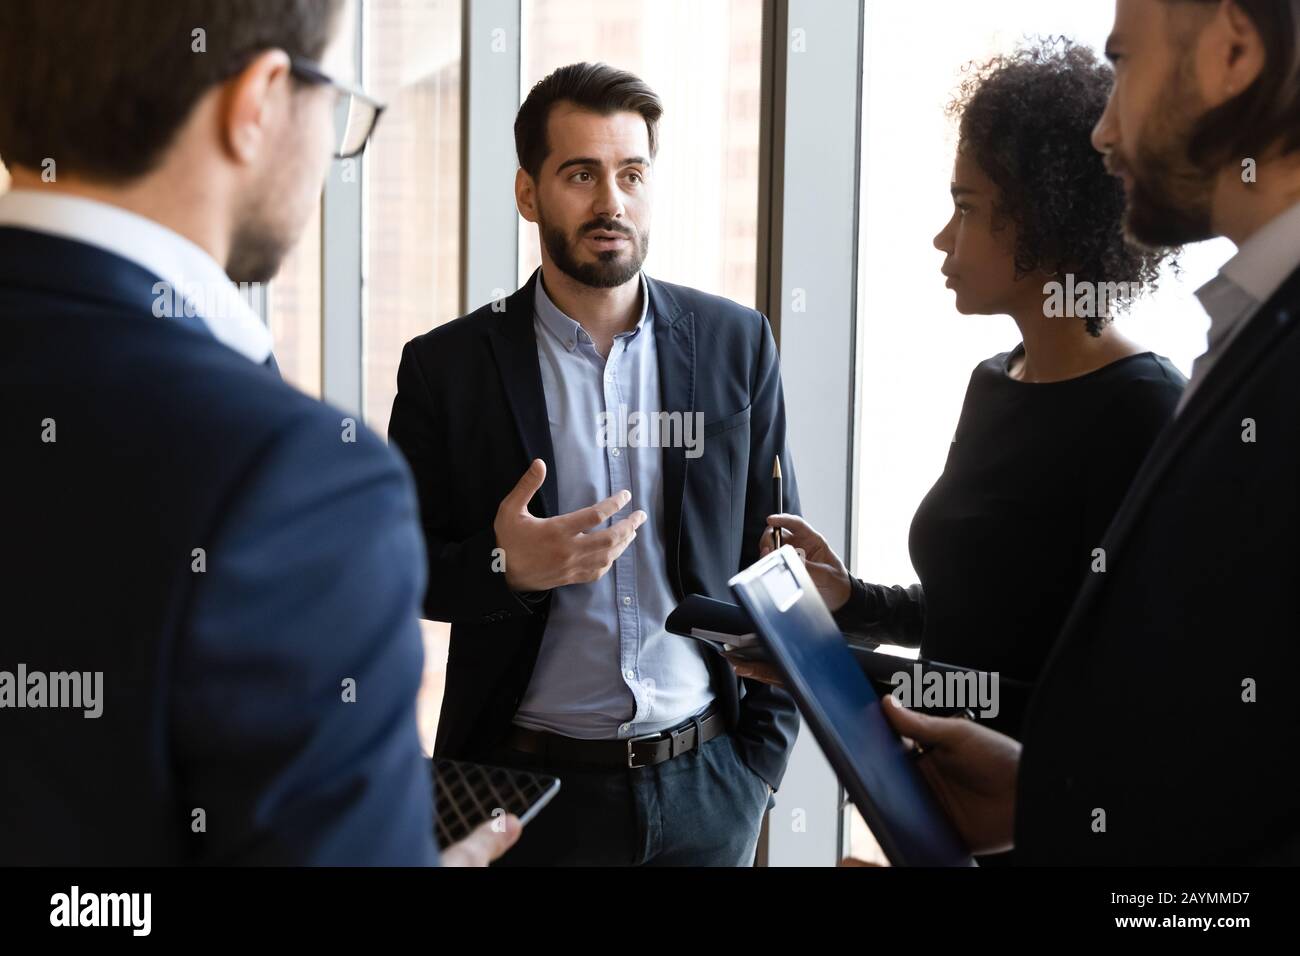 Confident businessman in suit standing telling diverse employees about project. Stock Photo